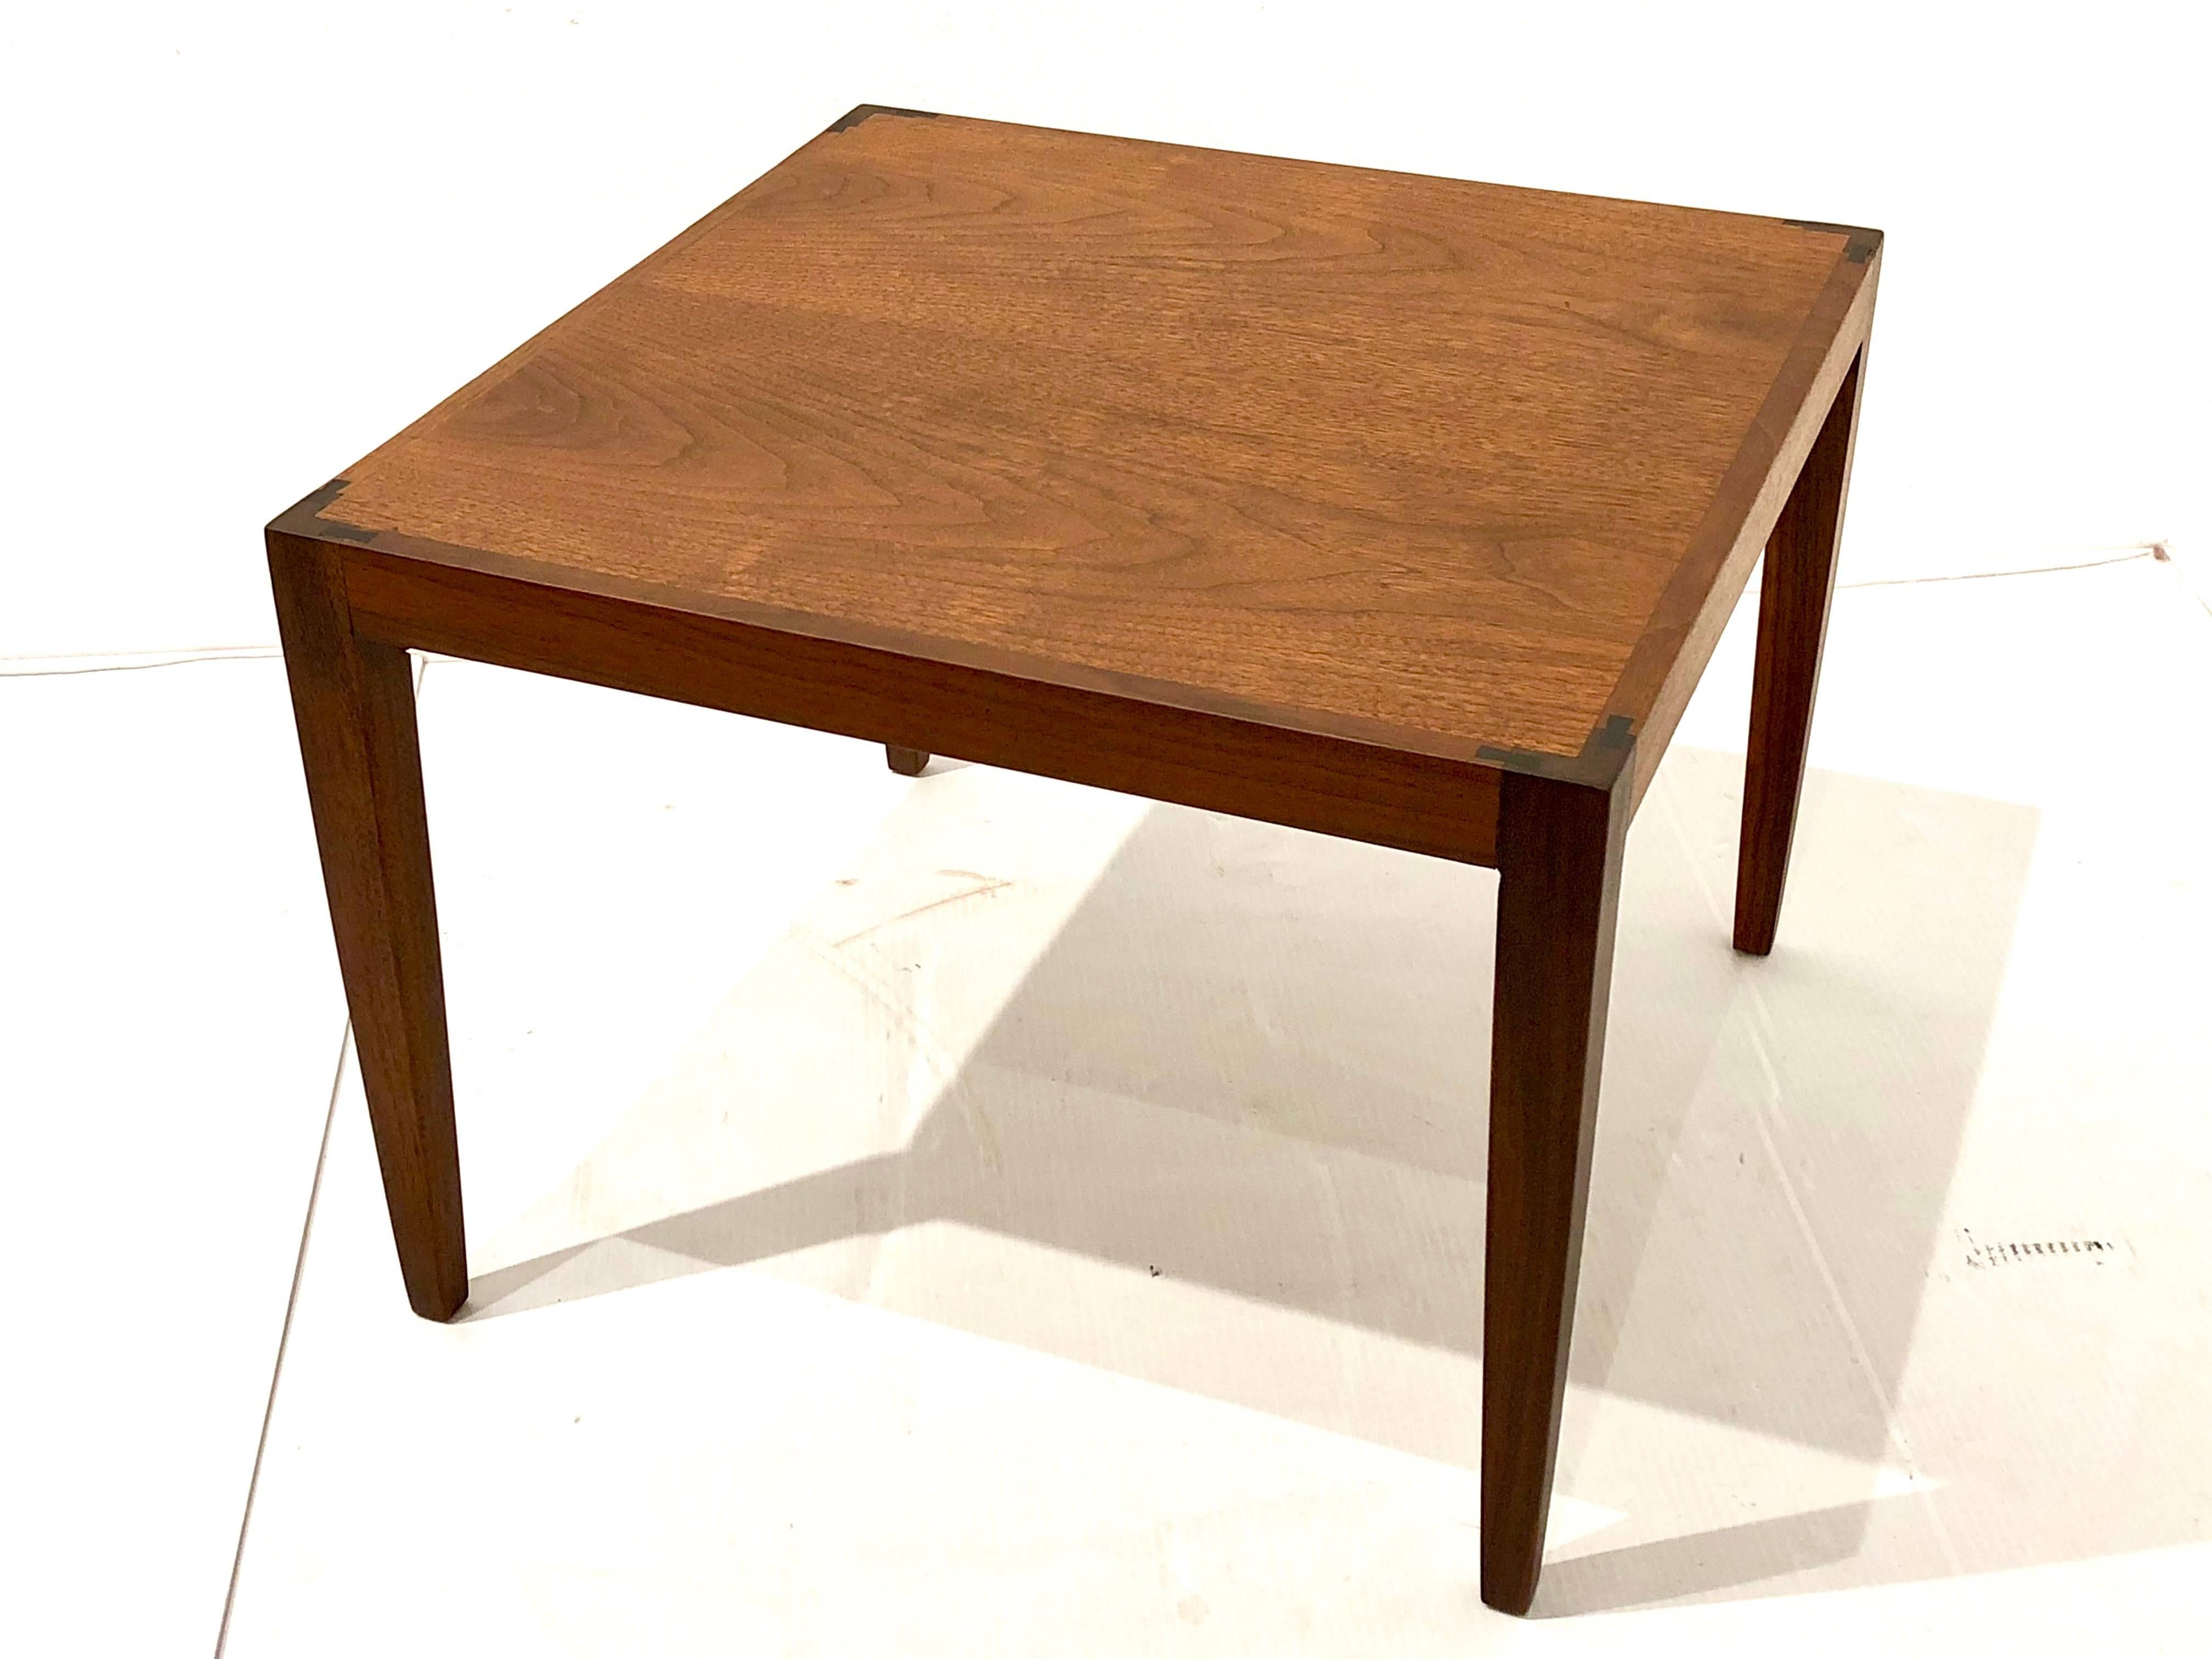 Exceptional small end table in teak with rosewood accents, freshly refinished , and in credible craftsmanship solid and sturdy.